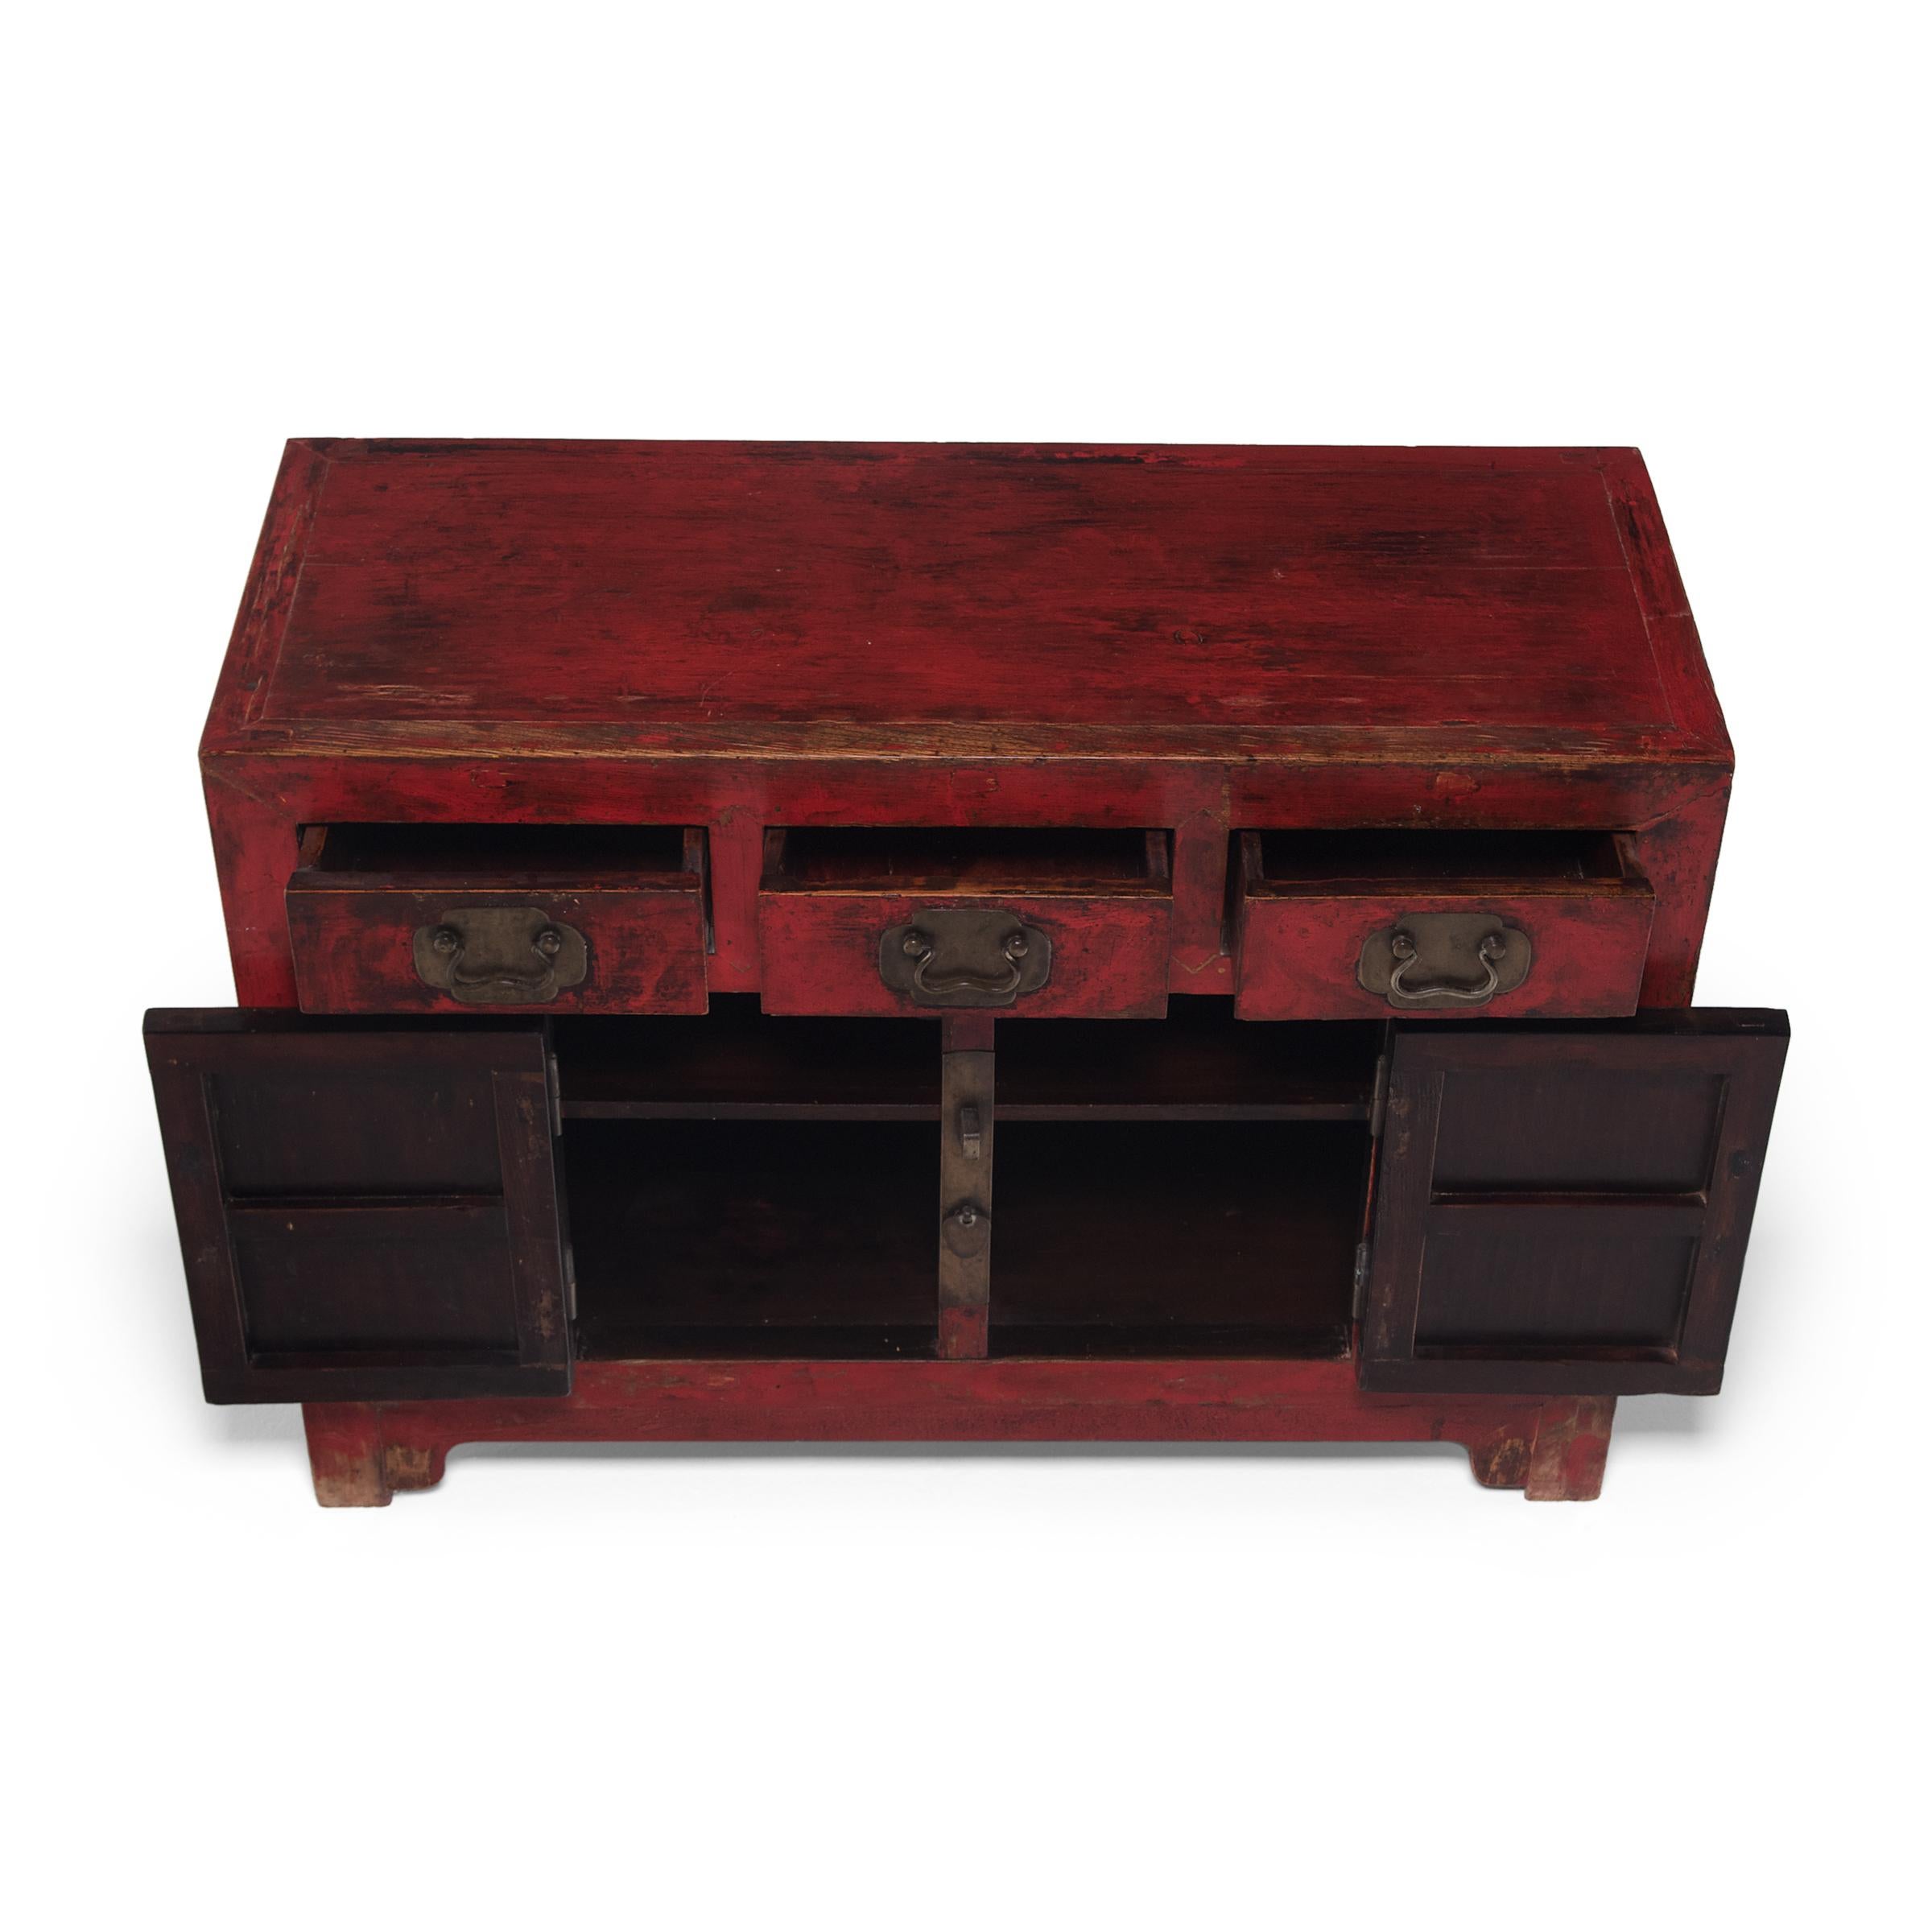 20th Century Chinese Red Lacquer Tianjin Coffer, c. 1880